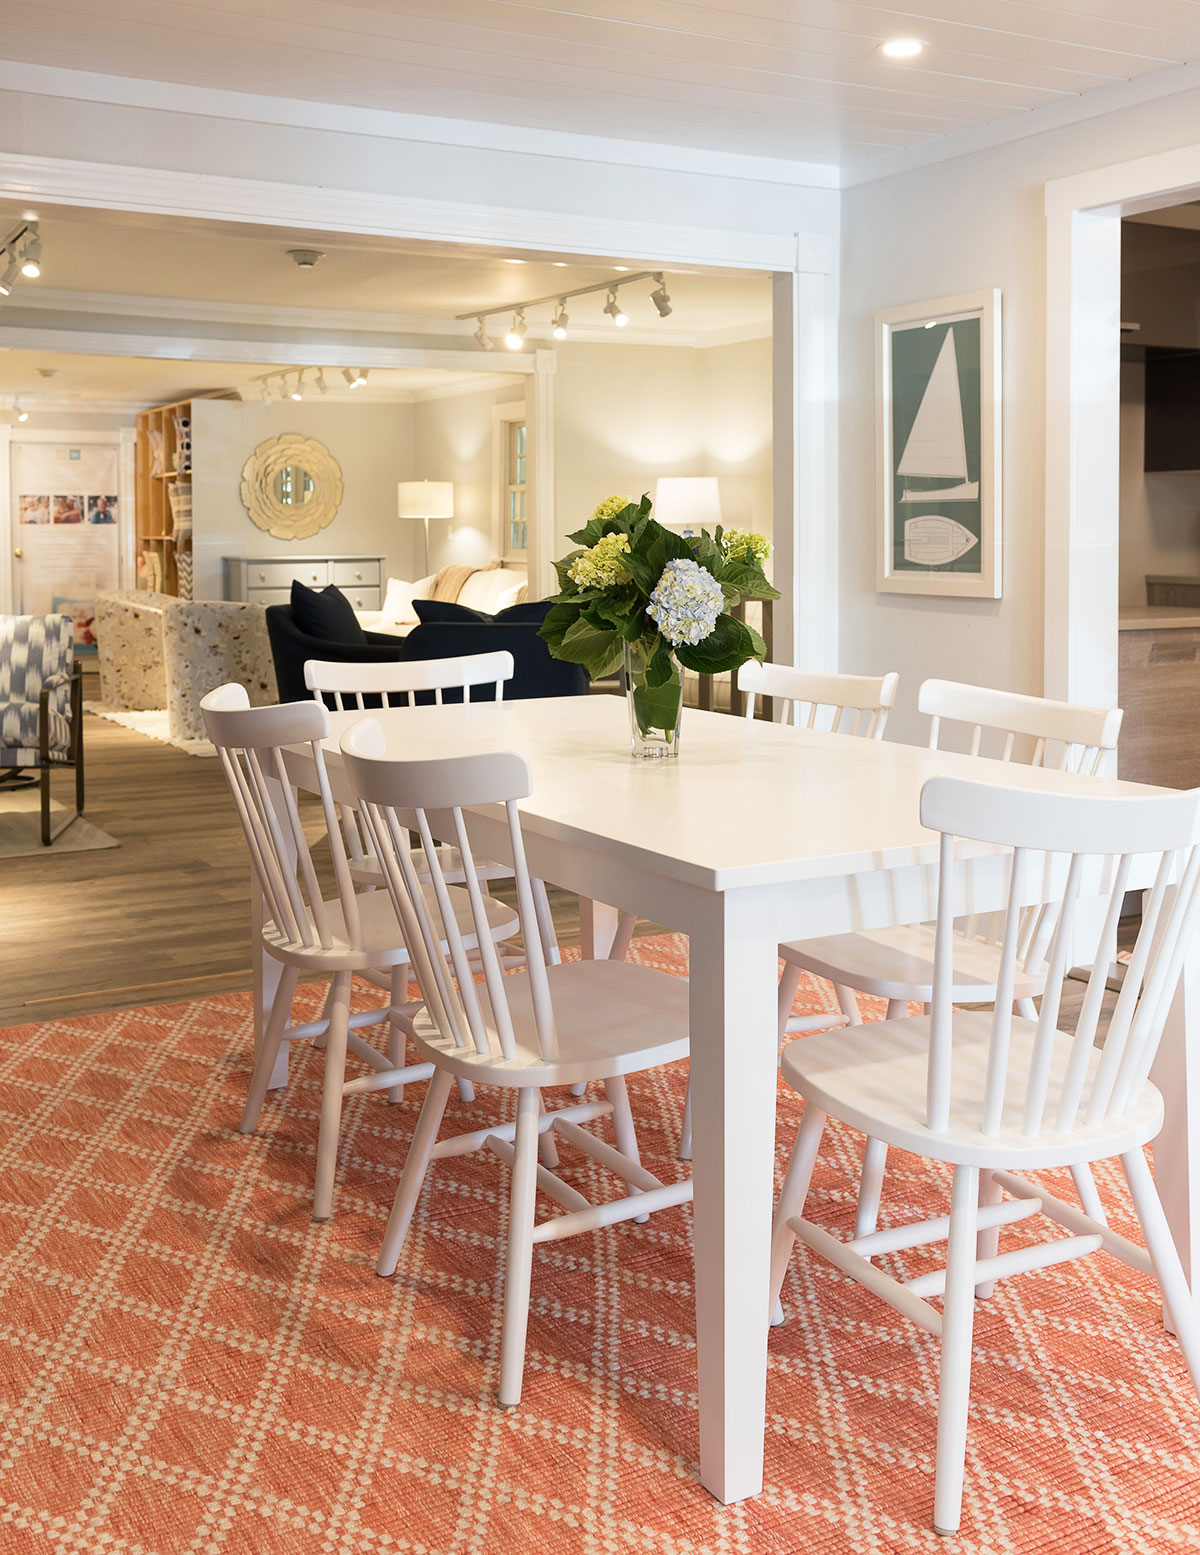 Dining room set up in Marine Home Center showroom